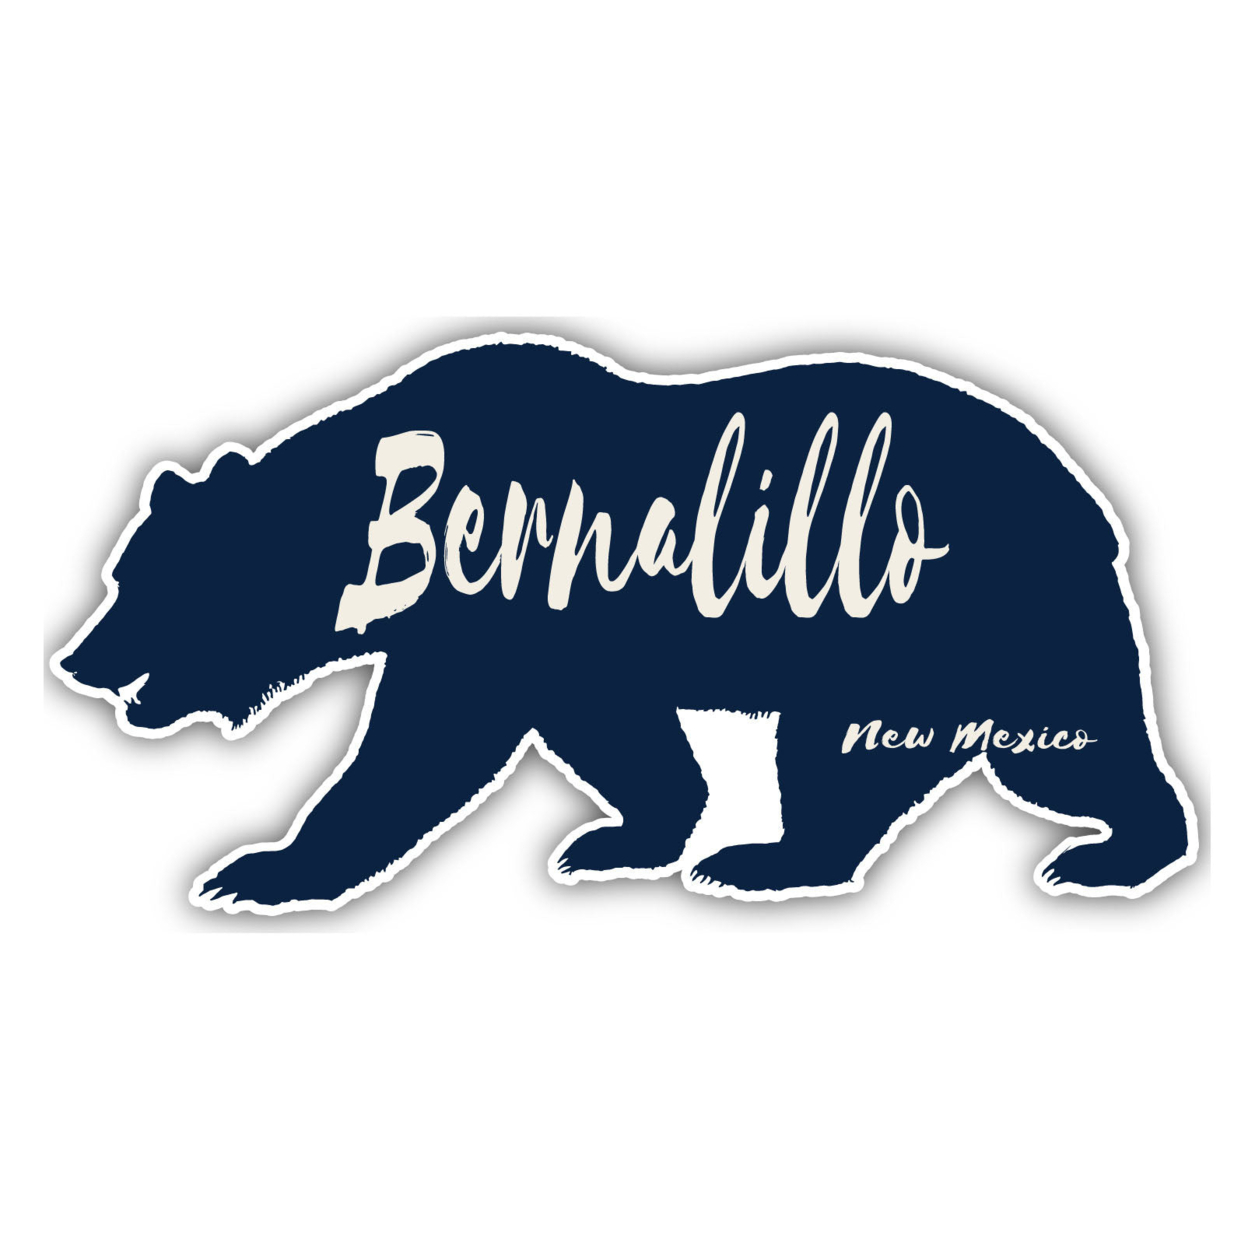 Bernalillo New Mexico Souvenir Decorative Stickers (Choose Theme And Size) - 4-Pack, 10-Inch, Tent